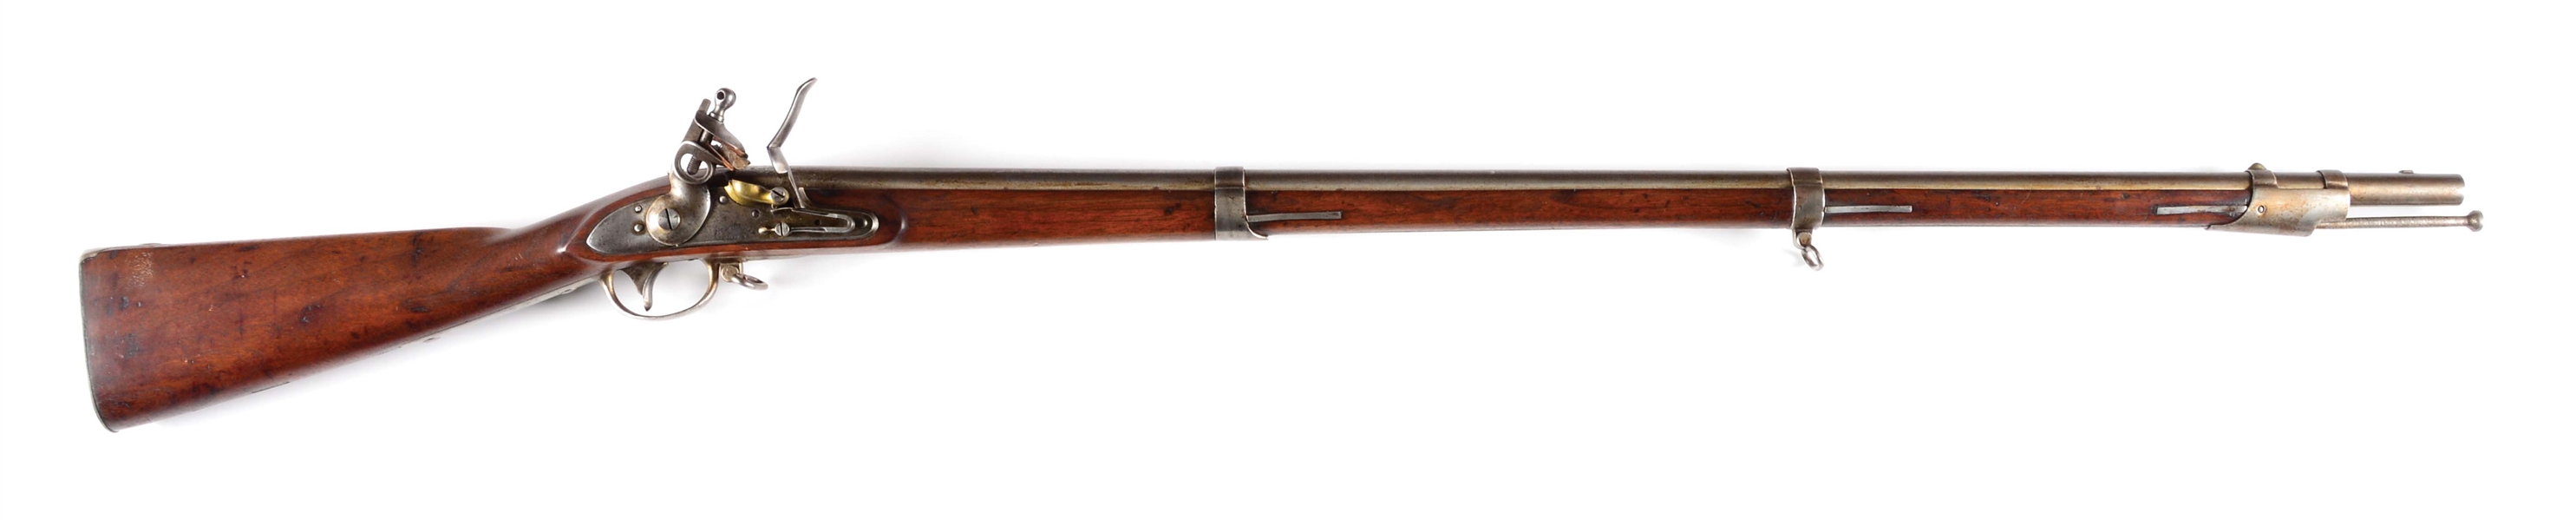 (A) "SUSSEX BRIGADE" MARKED NEW JERSEY M1816 FLINTLOCK CONTRACT MUSKET BY WICKHAM.